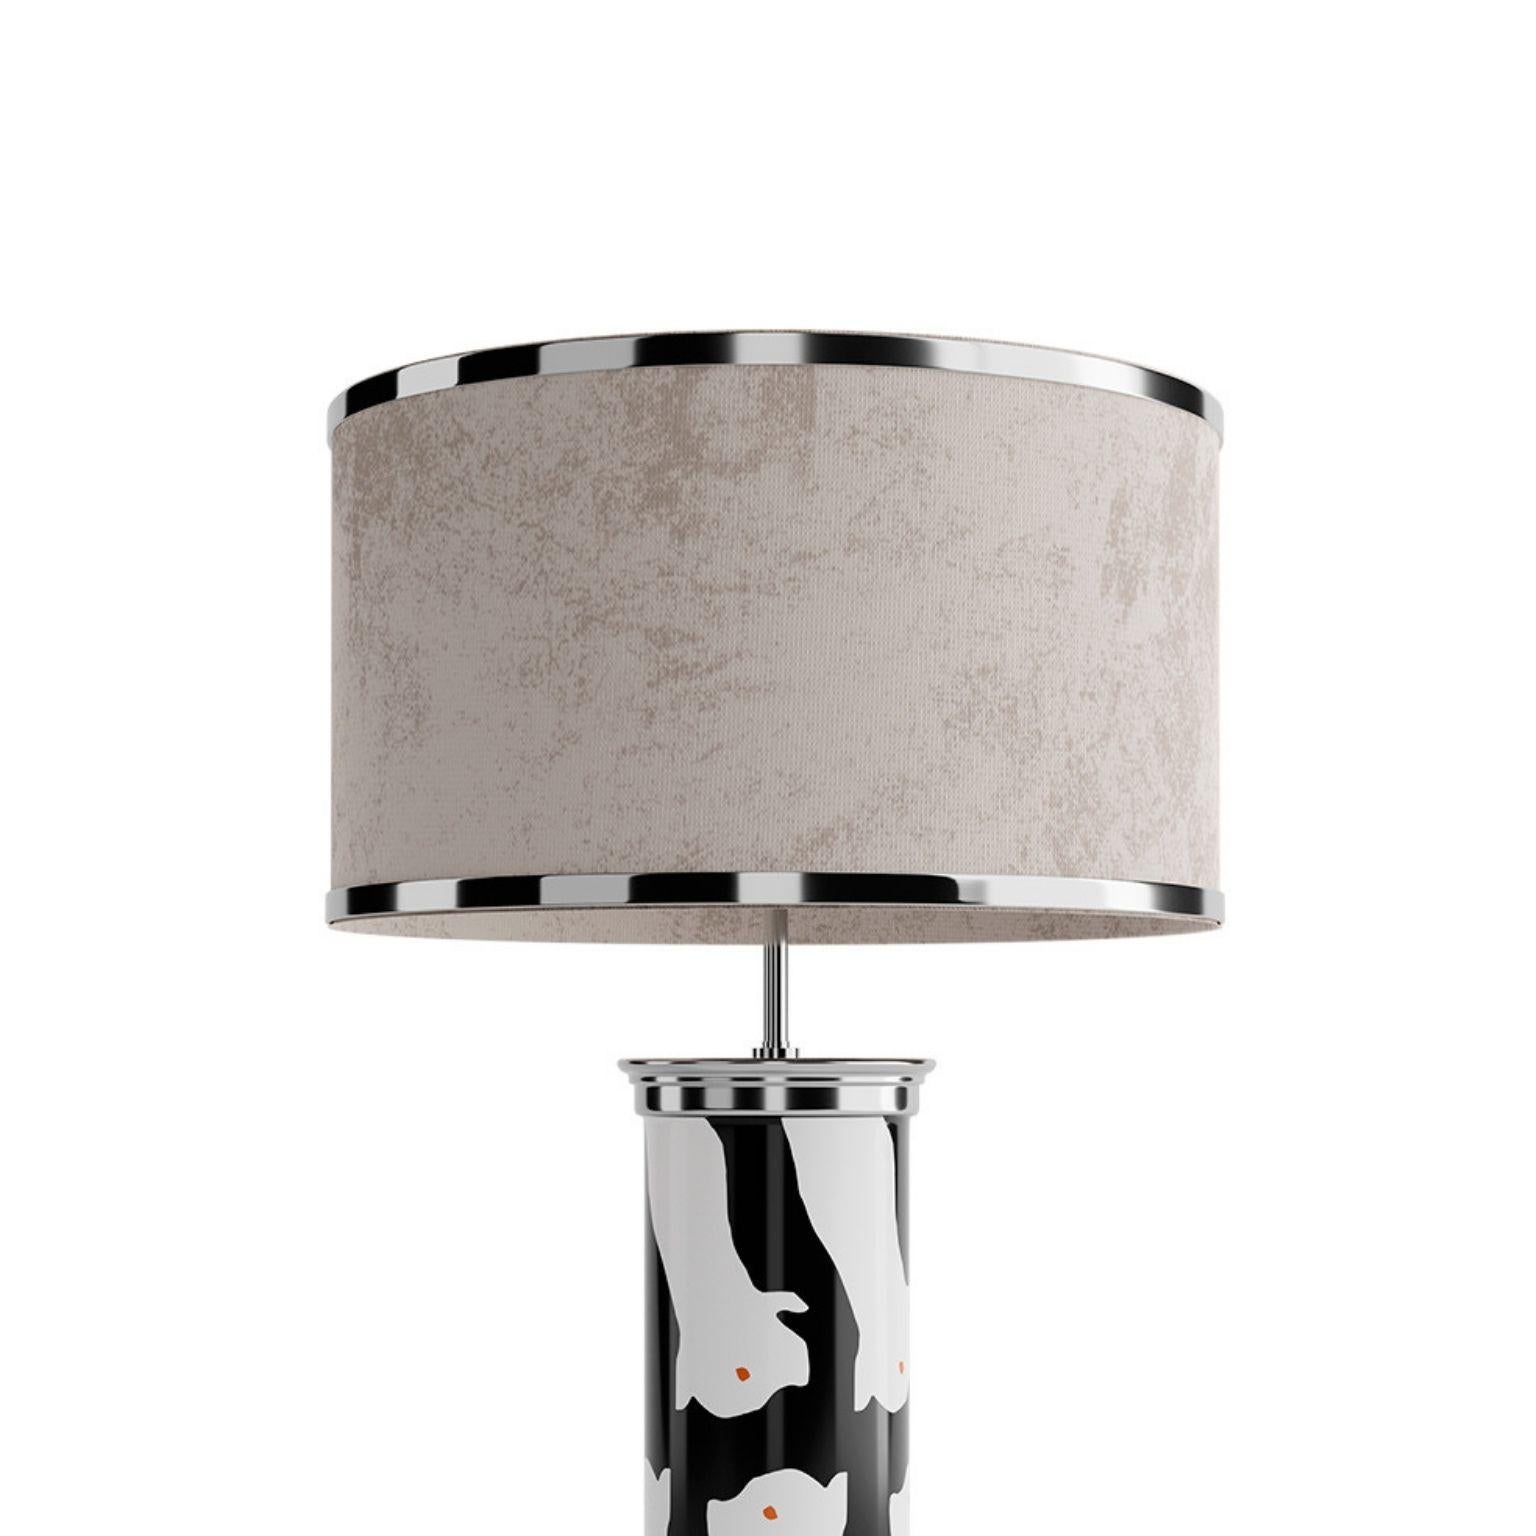 Modern Hand-Painted Eclipse Table Lamp, an Handmade Grey, Black and White Decor Lamp For Sale